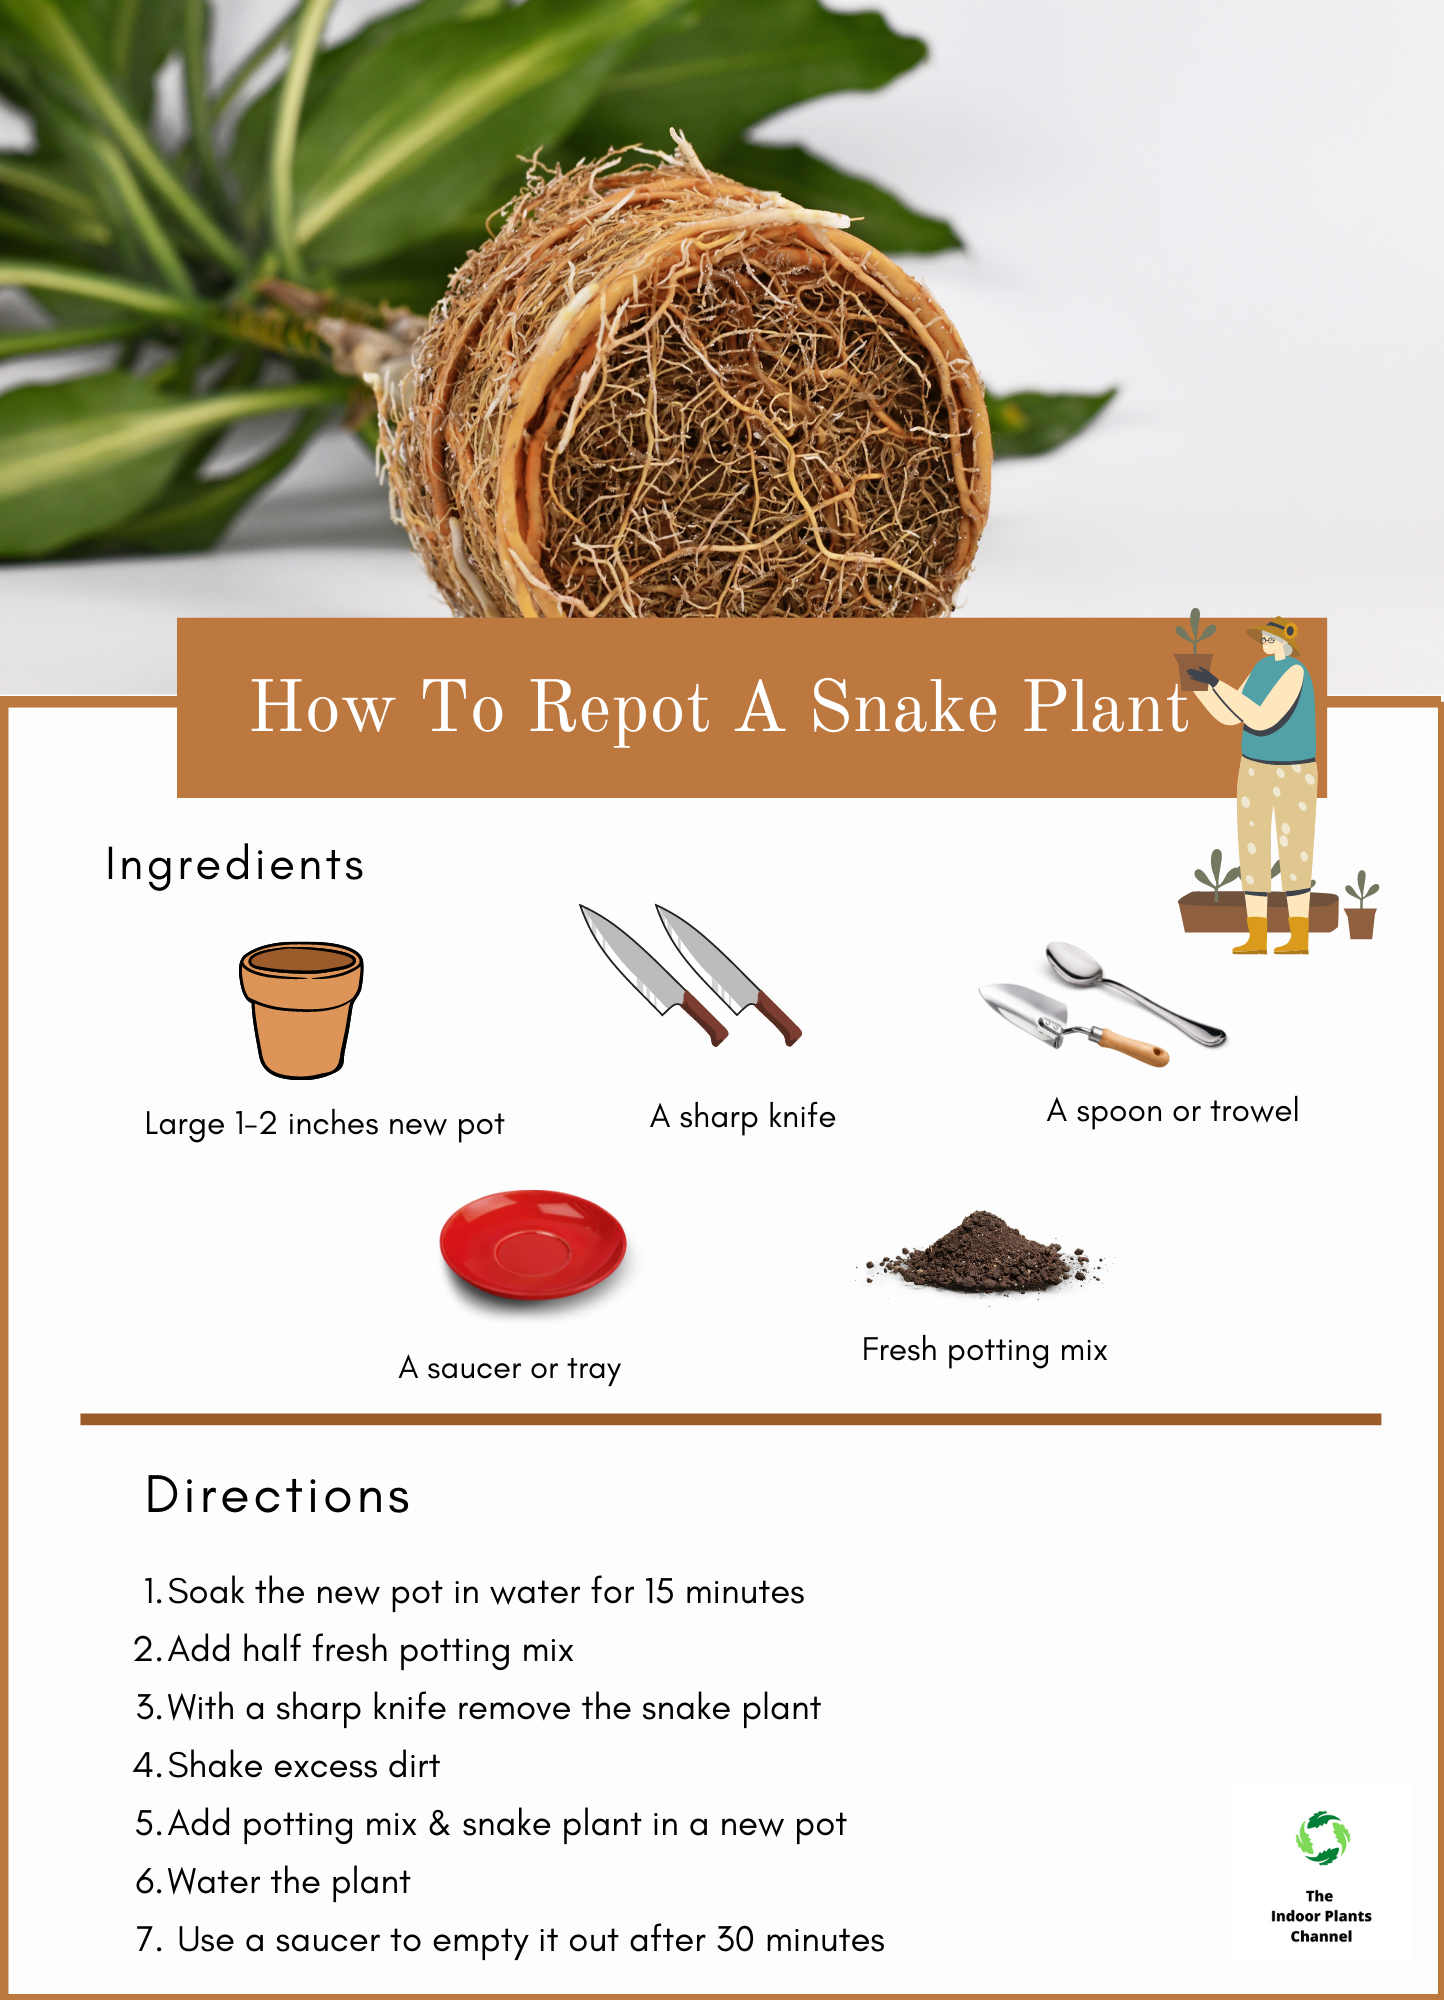 How To Repot A Snake Plant?